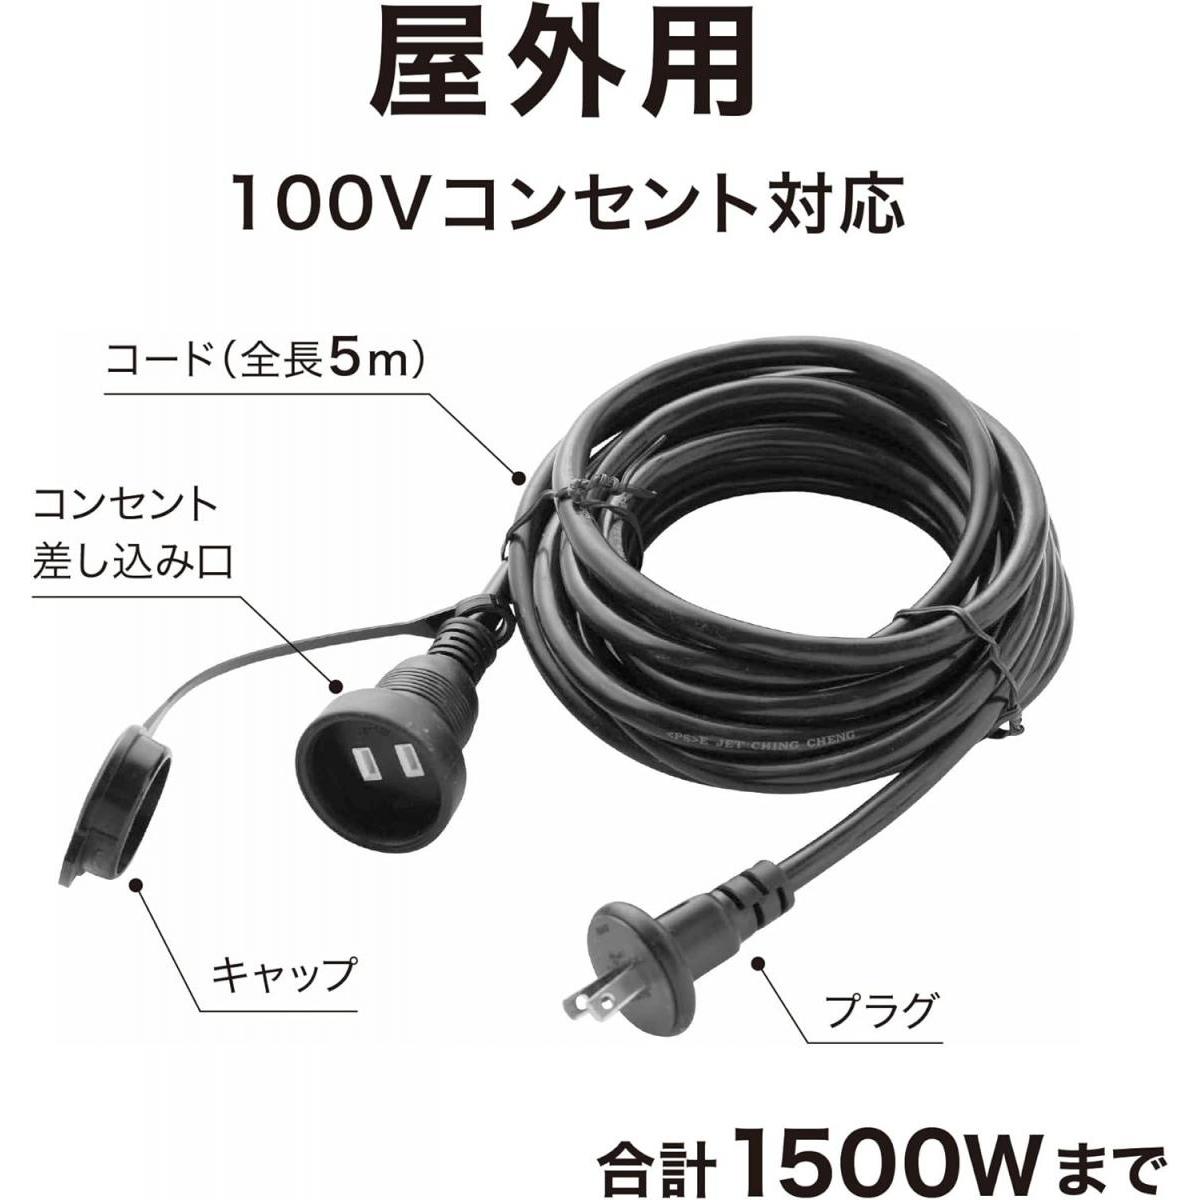 taka show outdoors for extension cable 5m outlet outdoors illumination 100V correspondence total 1500W till two -ply .. cable extension LSO-06